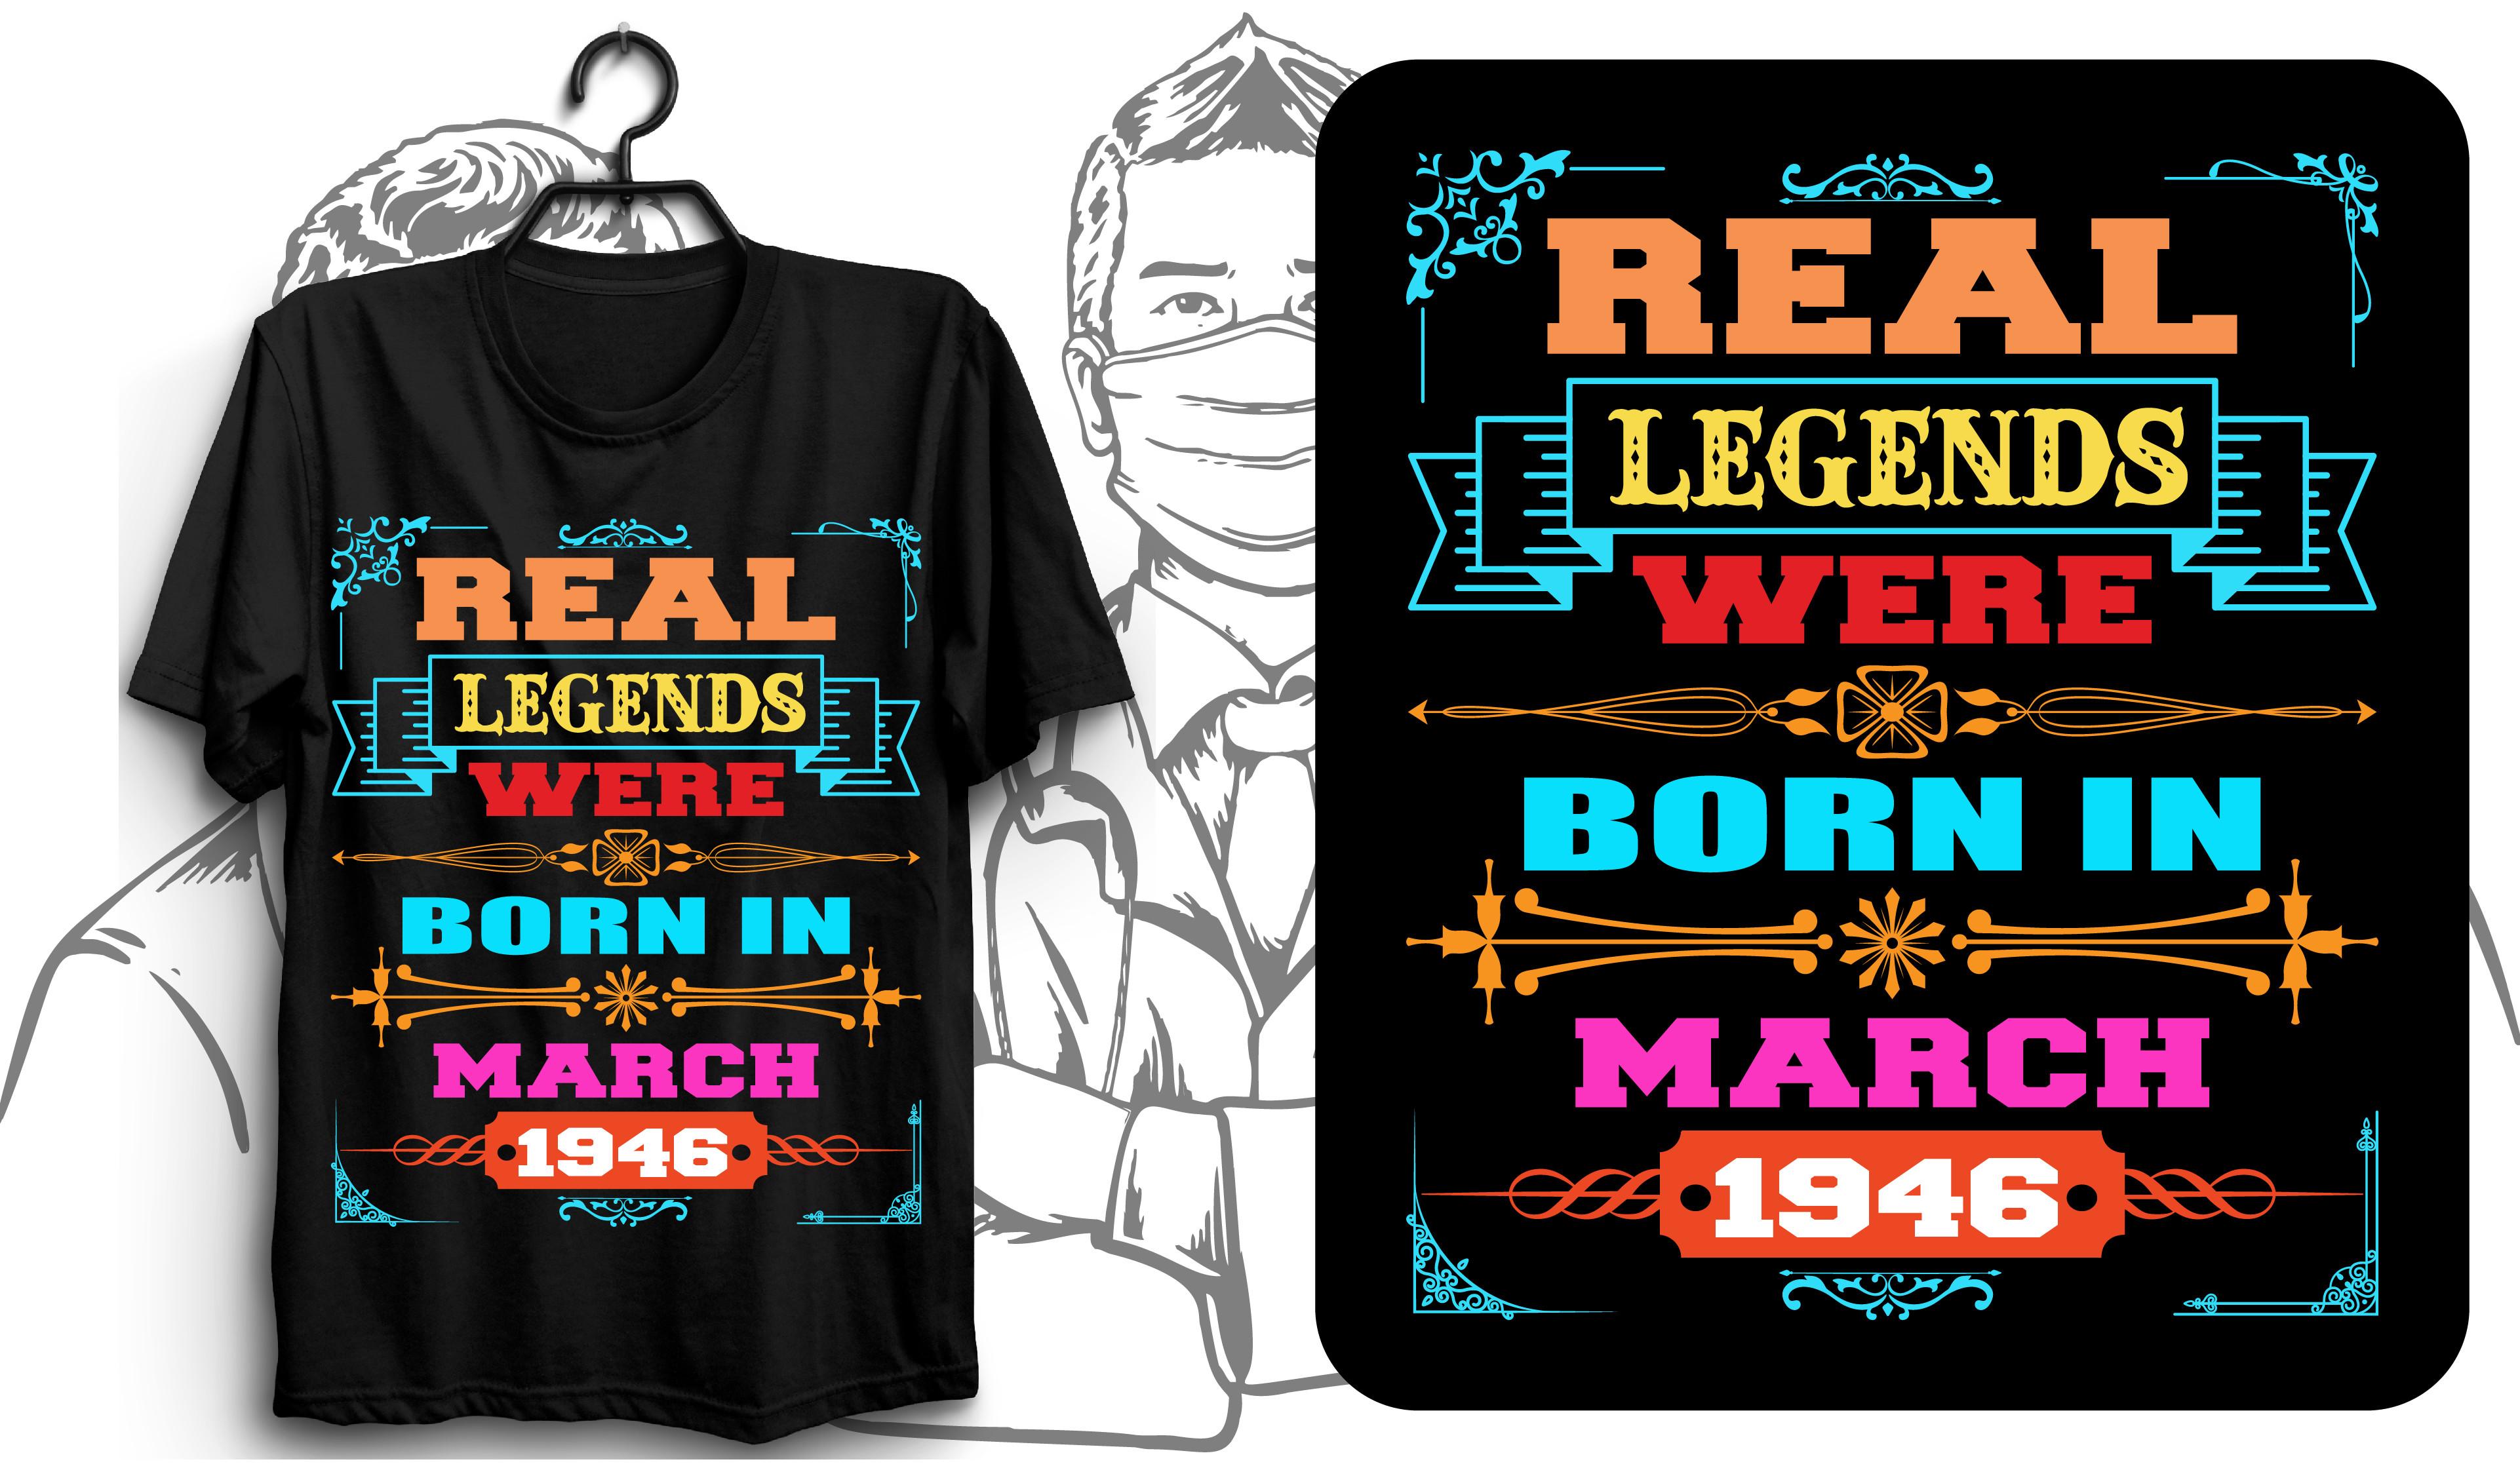 Real Legends Were Born in March 1946